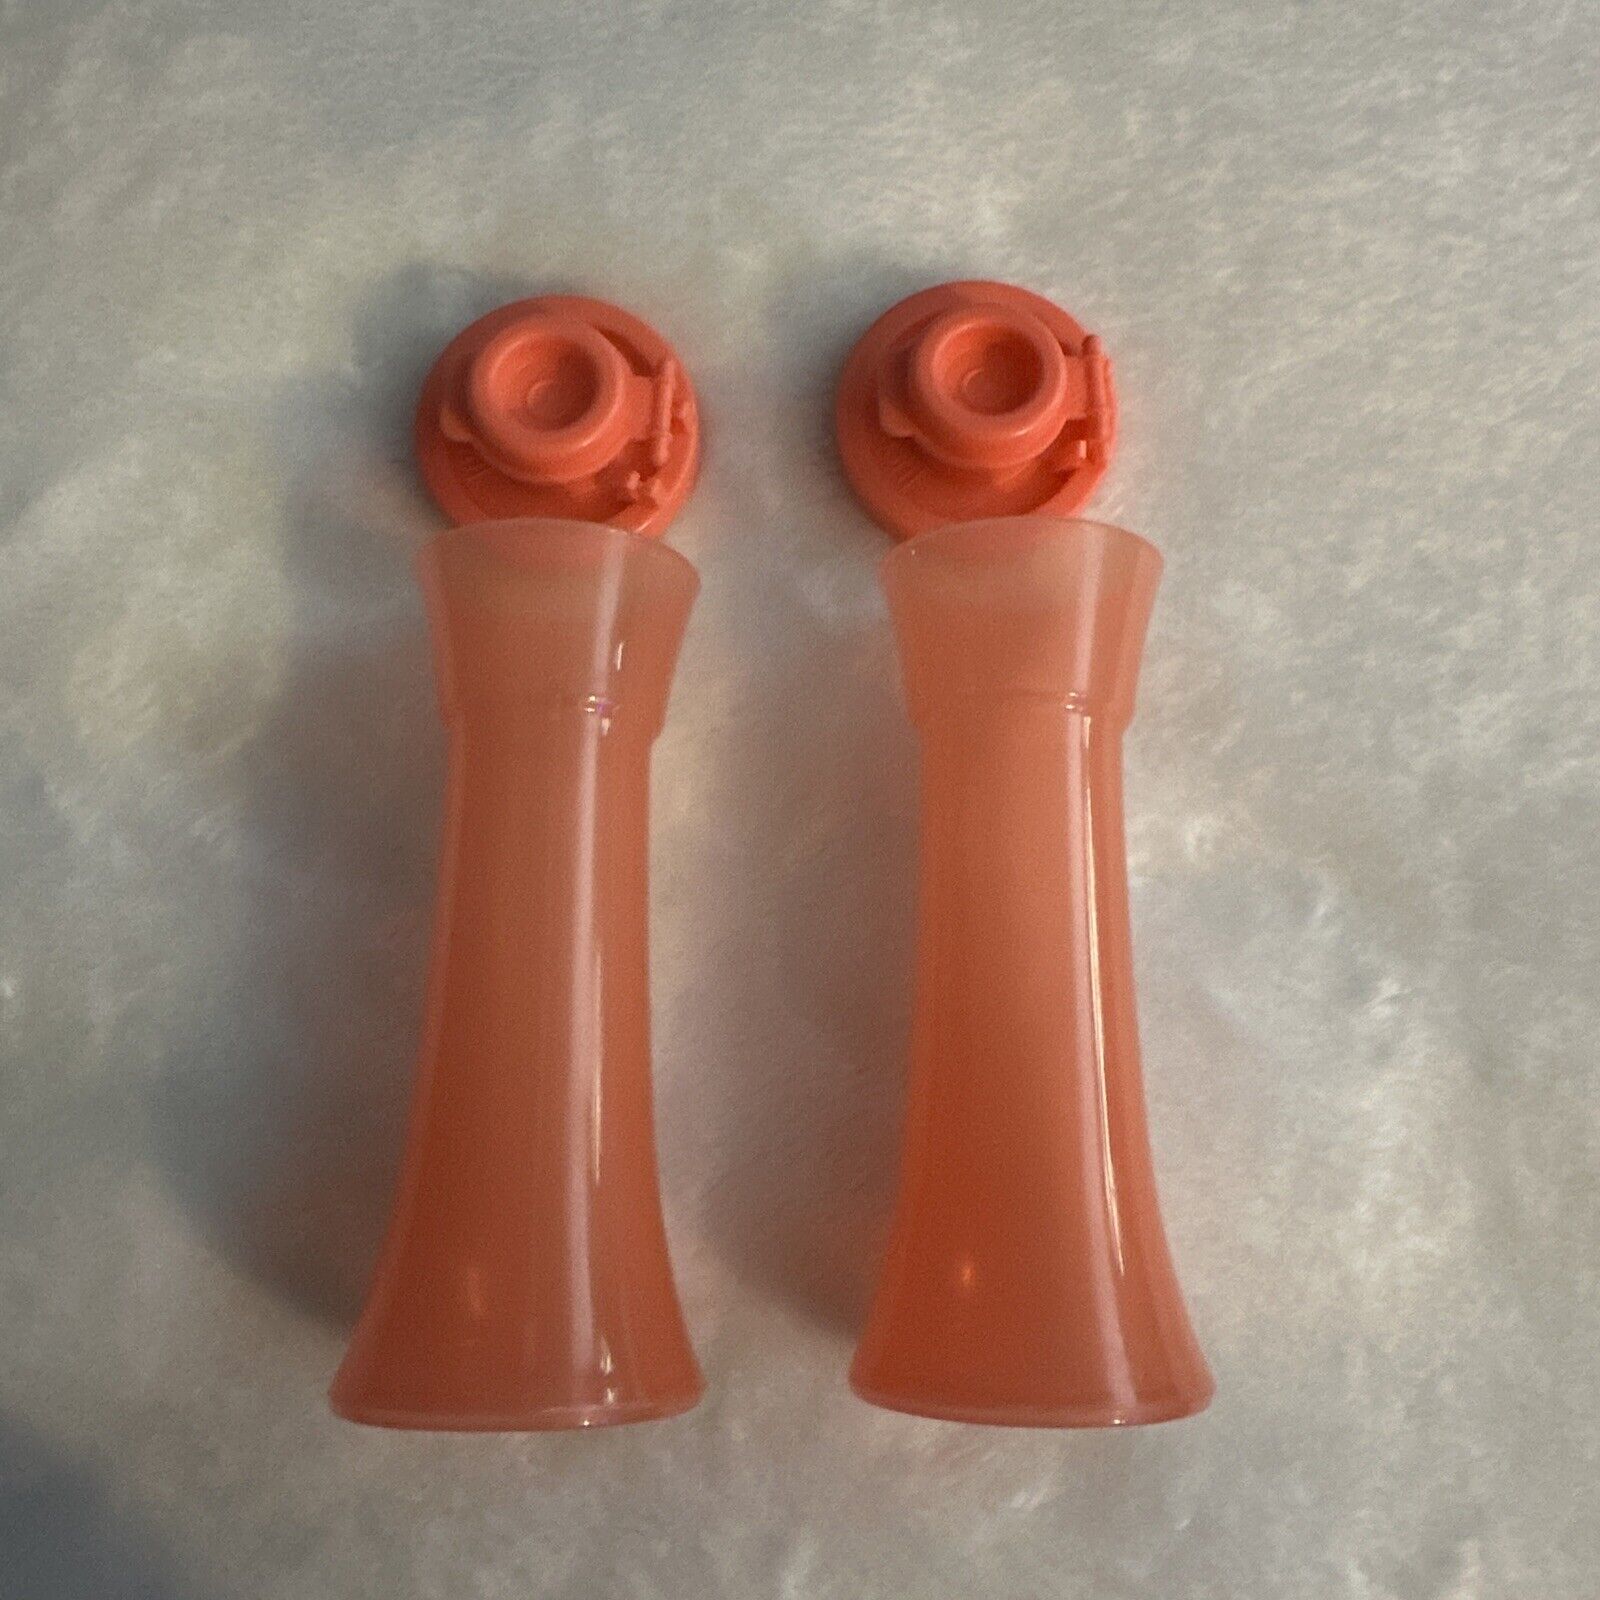 Tupperware Small Hourglass Salt & Pepper Shaker Set Coral w/ Matching Seal New